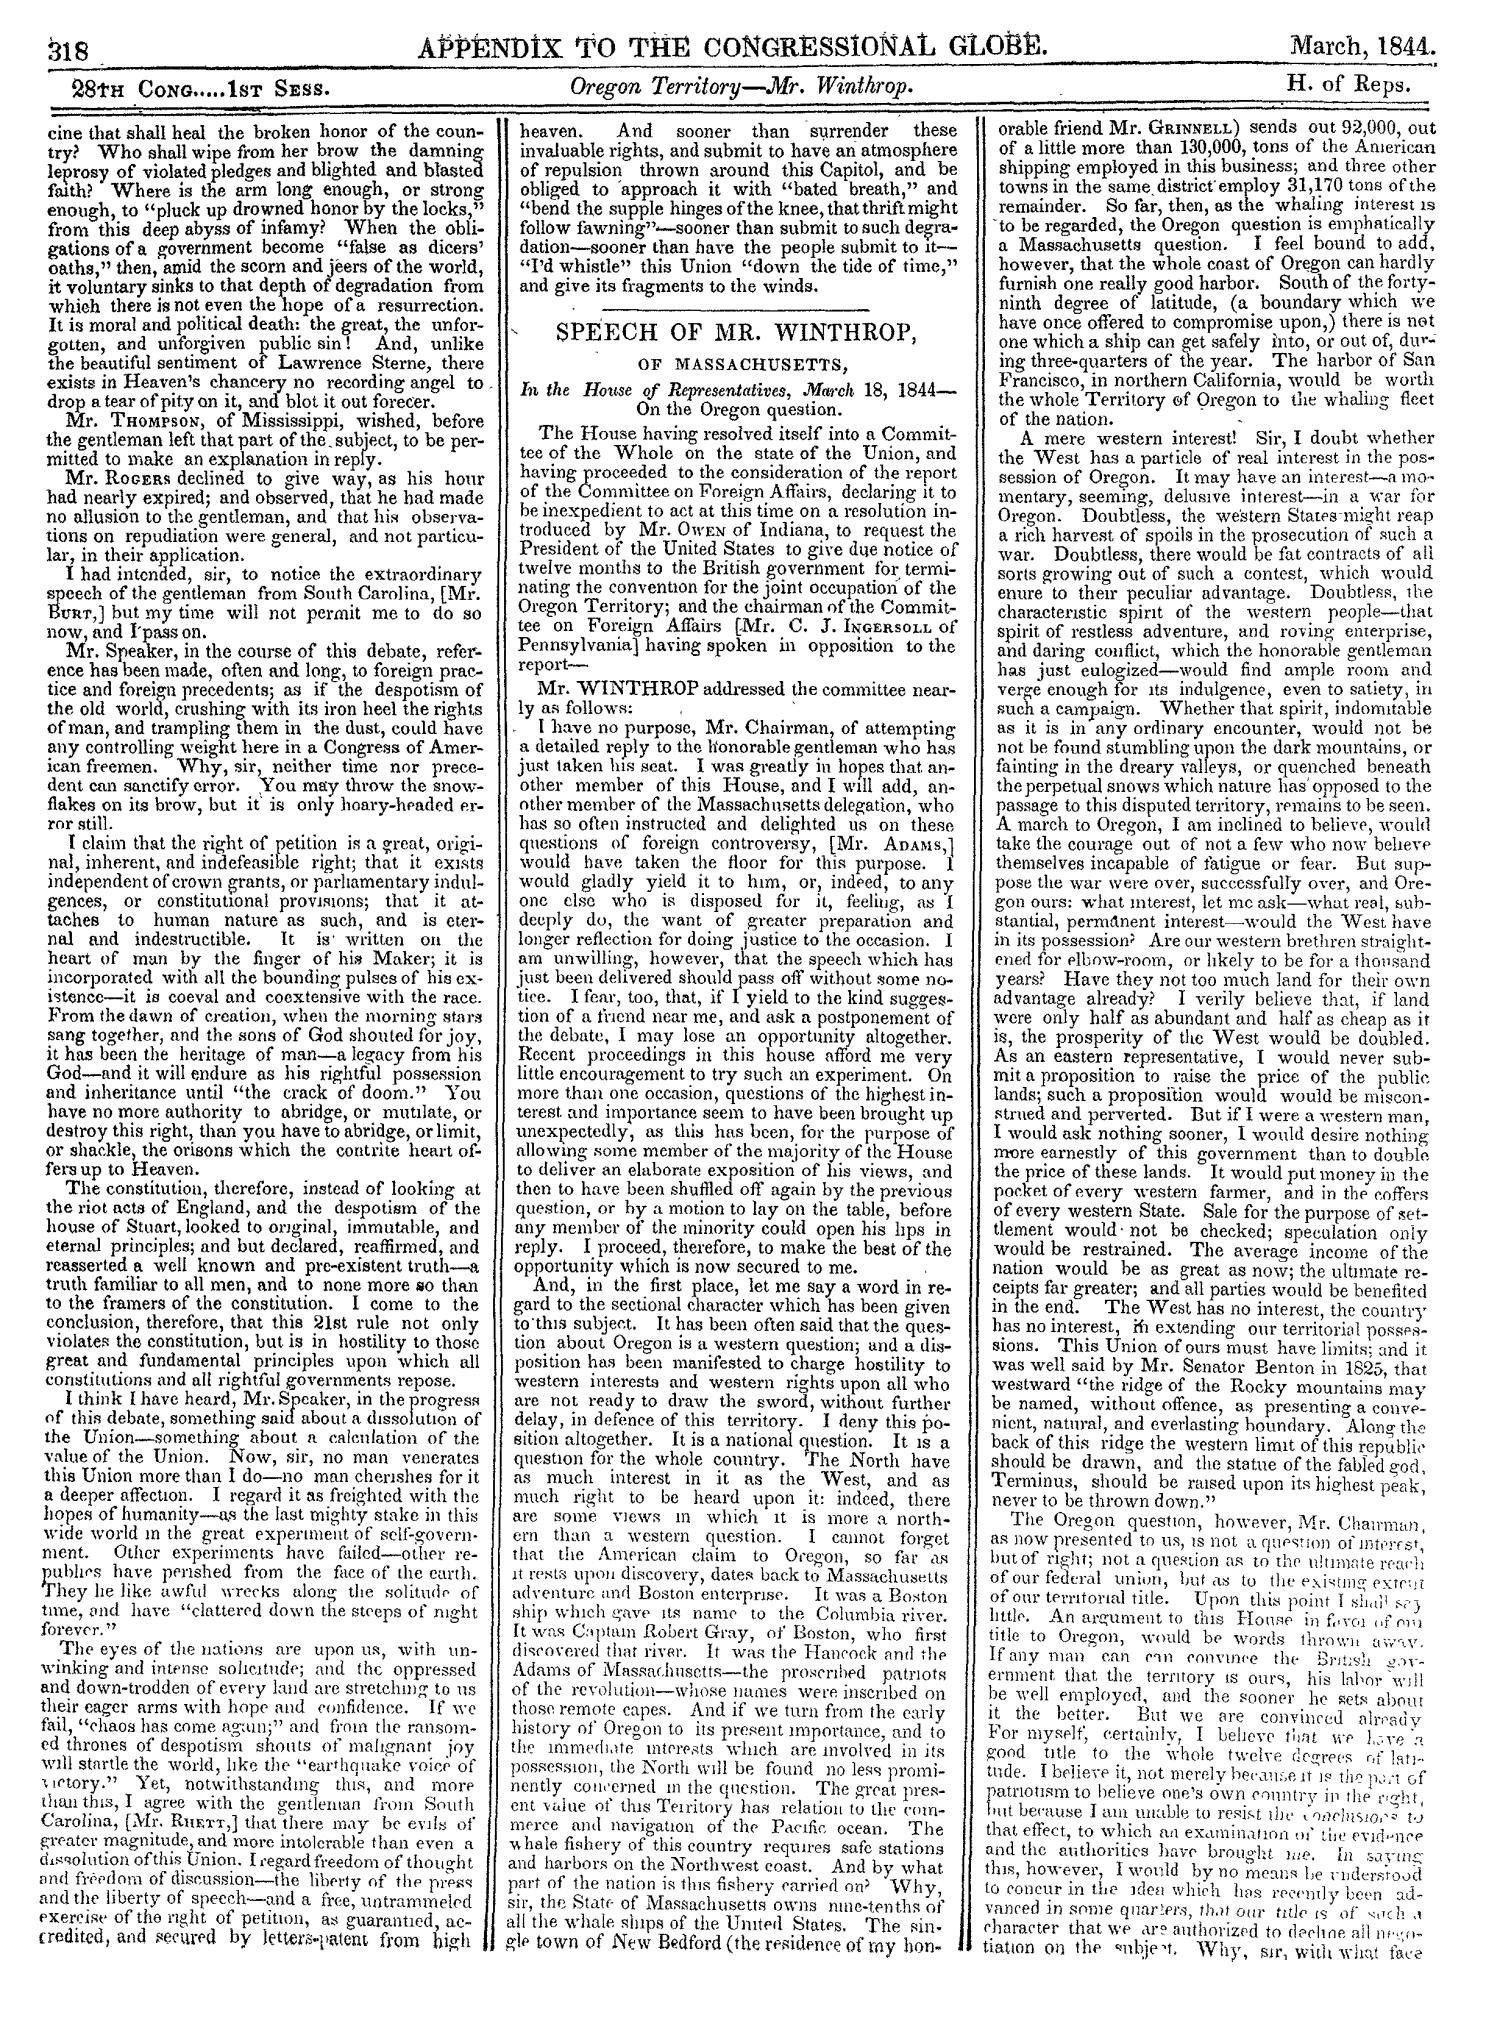 The Congressional Globe, Volume 13, Part 2: Twenty-Eighth Congress, First Session
                                                
                                                    318
                                                